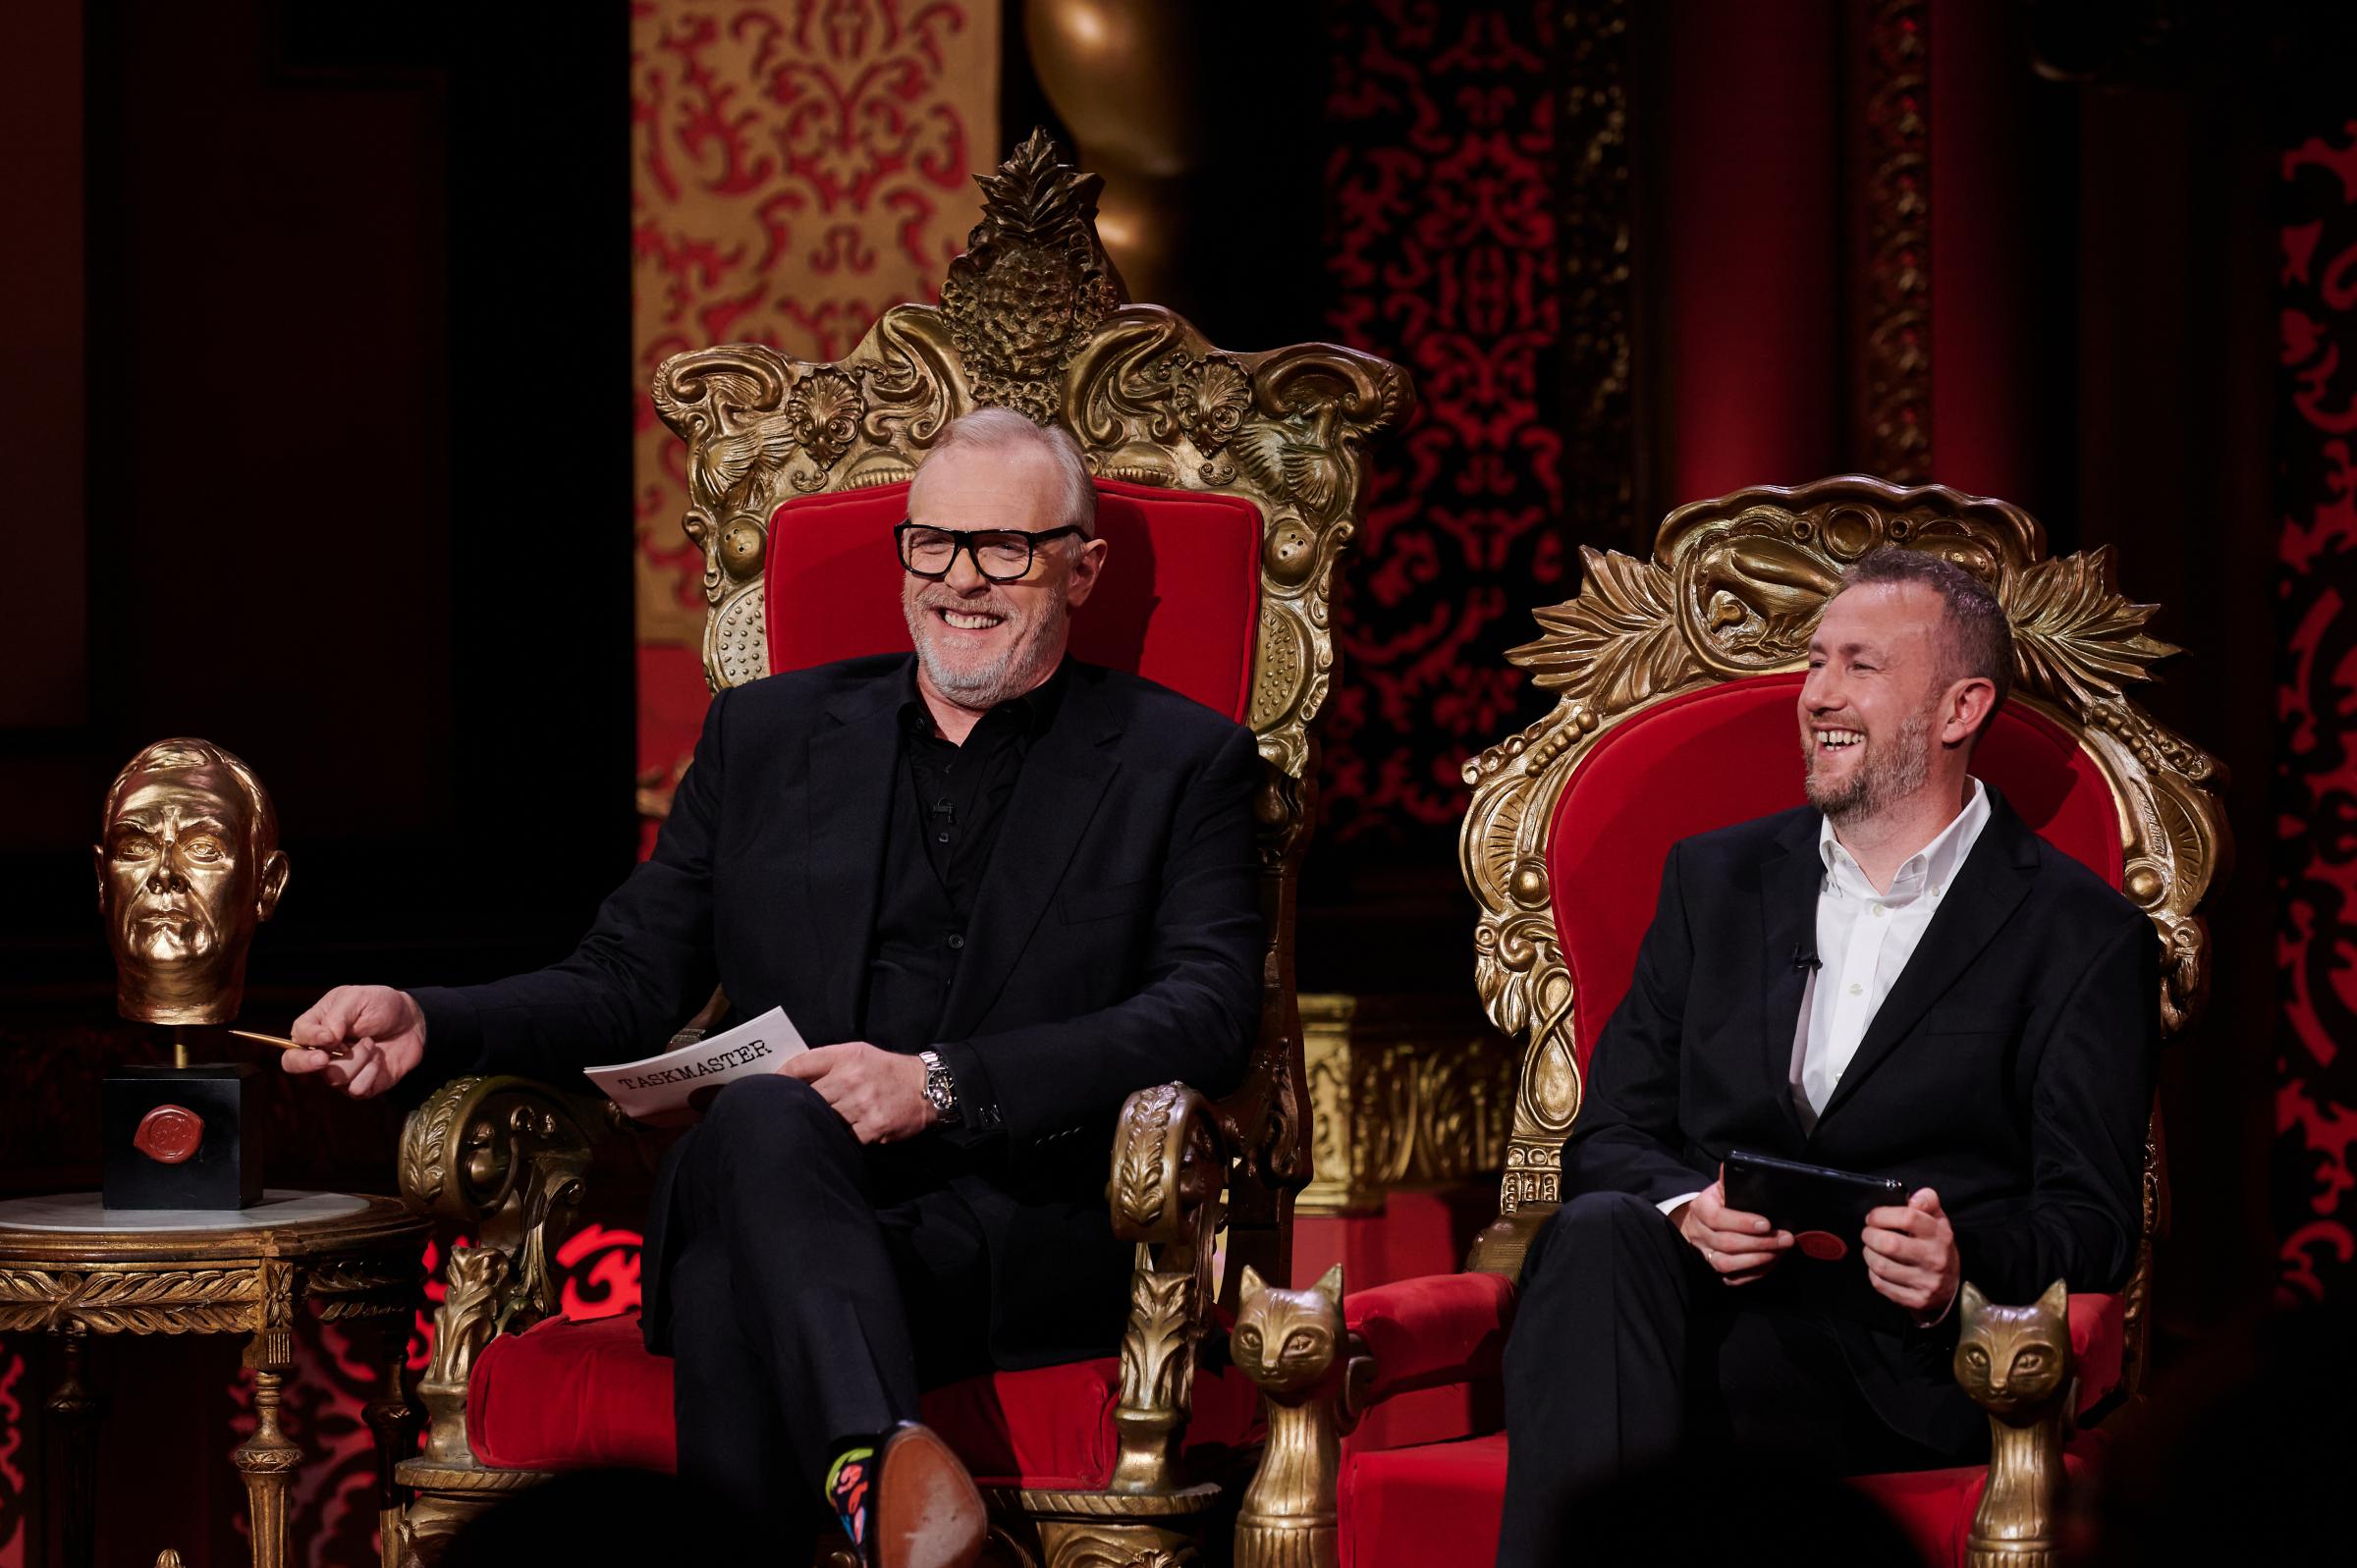 Undated Handout Photo from Taskmaster. Pictured: (L-R) Greg Davies and Alex Horne. 